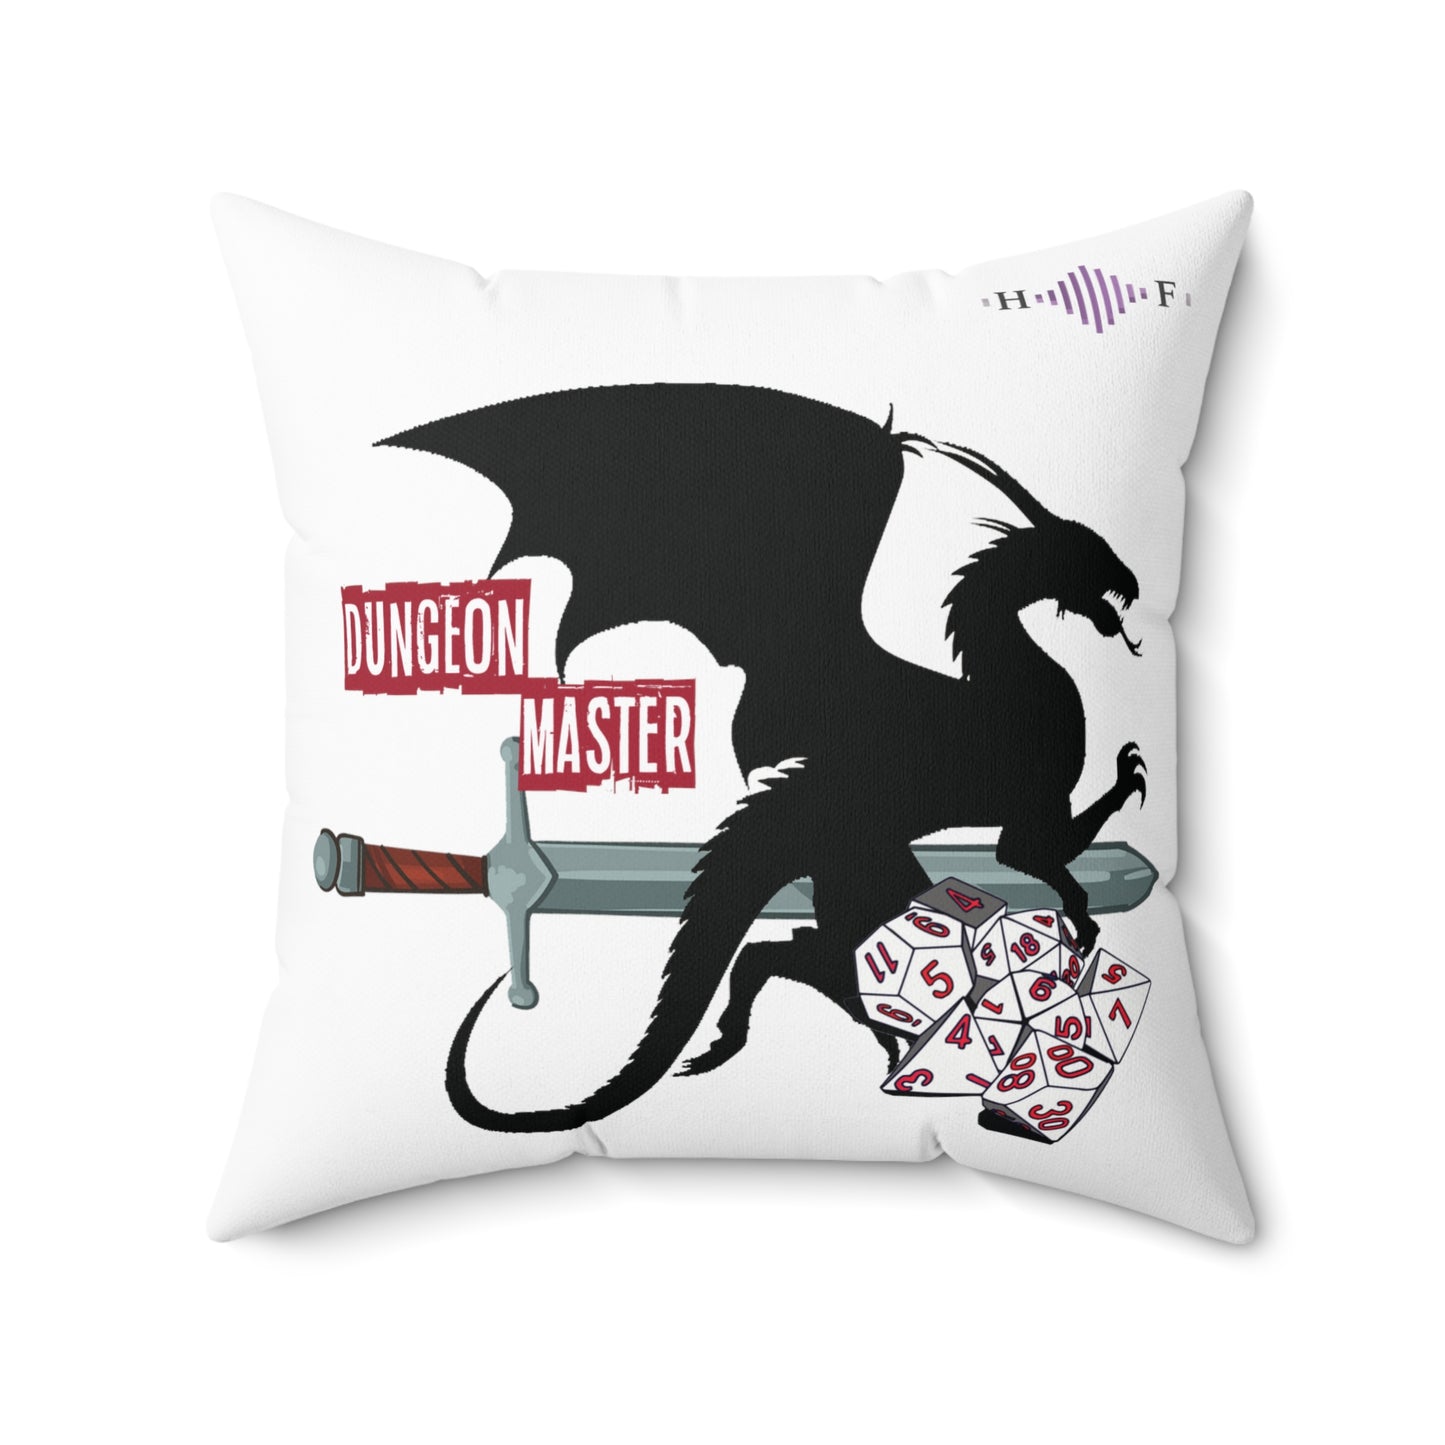 Dungeon Master - Square Pillow ( DM )